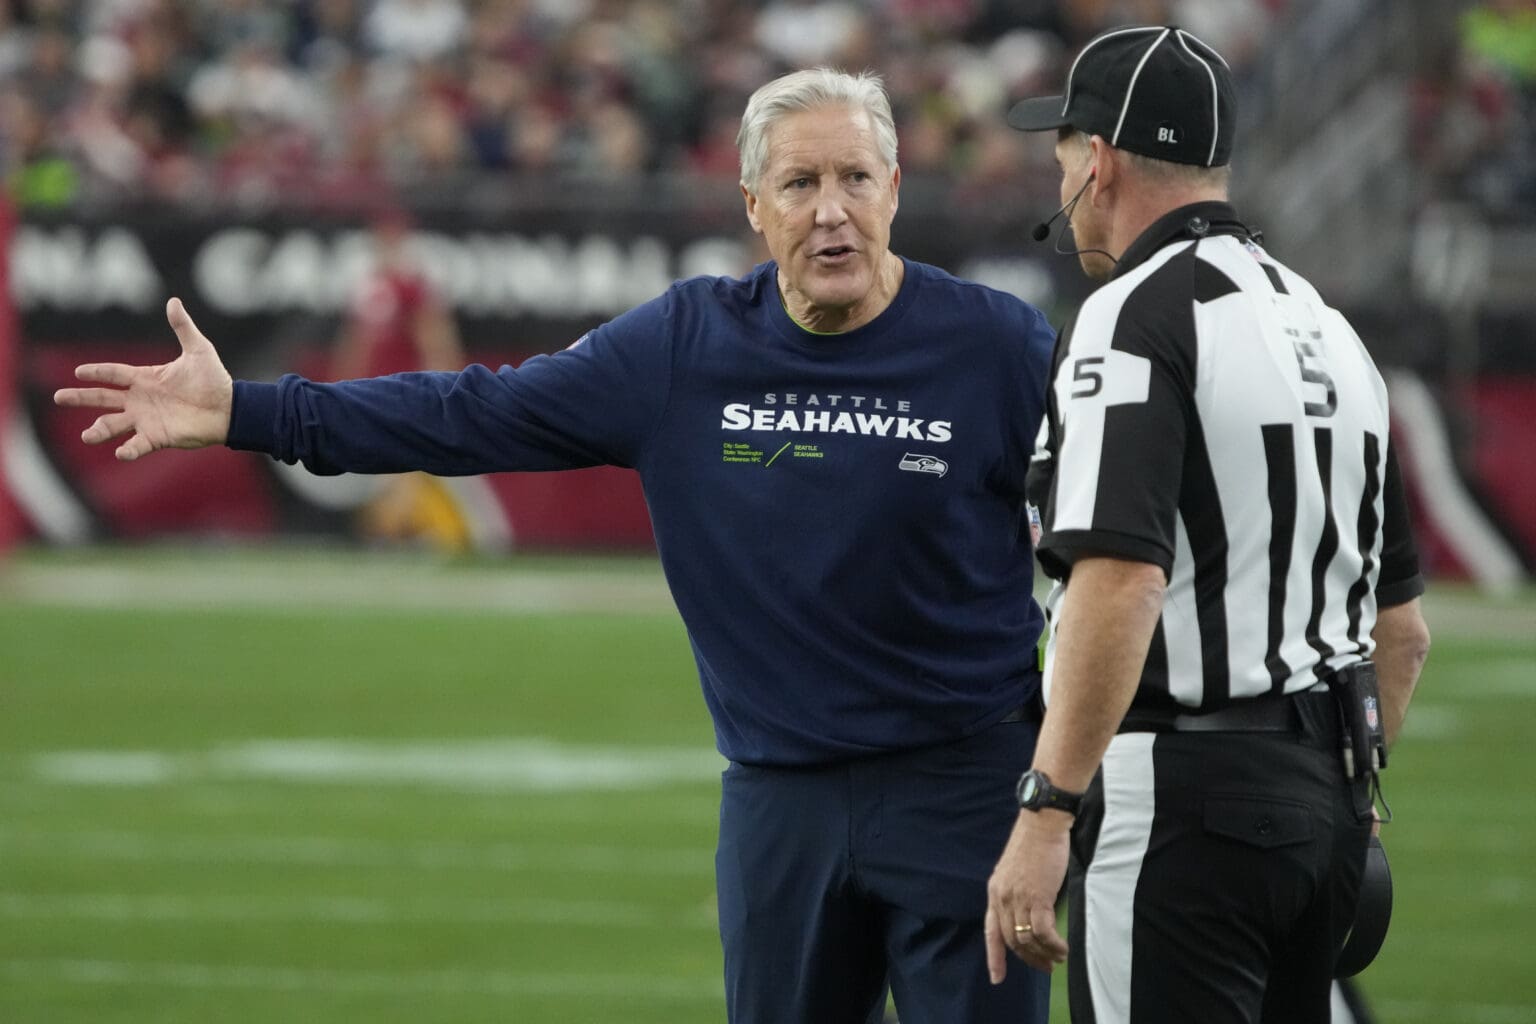 Seattle Seahawks head coach Pete Carroll argues a call with side judge Jim Quirk (5) as he gestures with one hand towards the field.